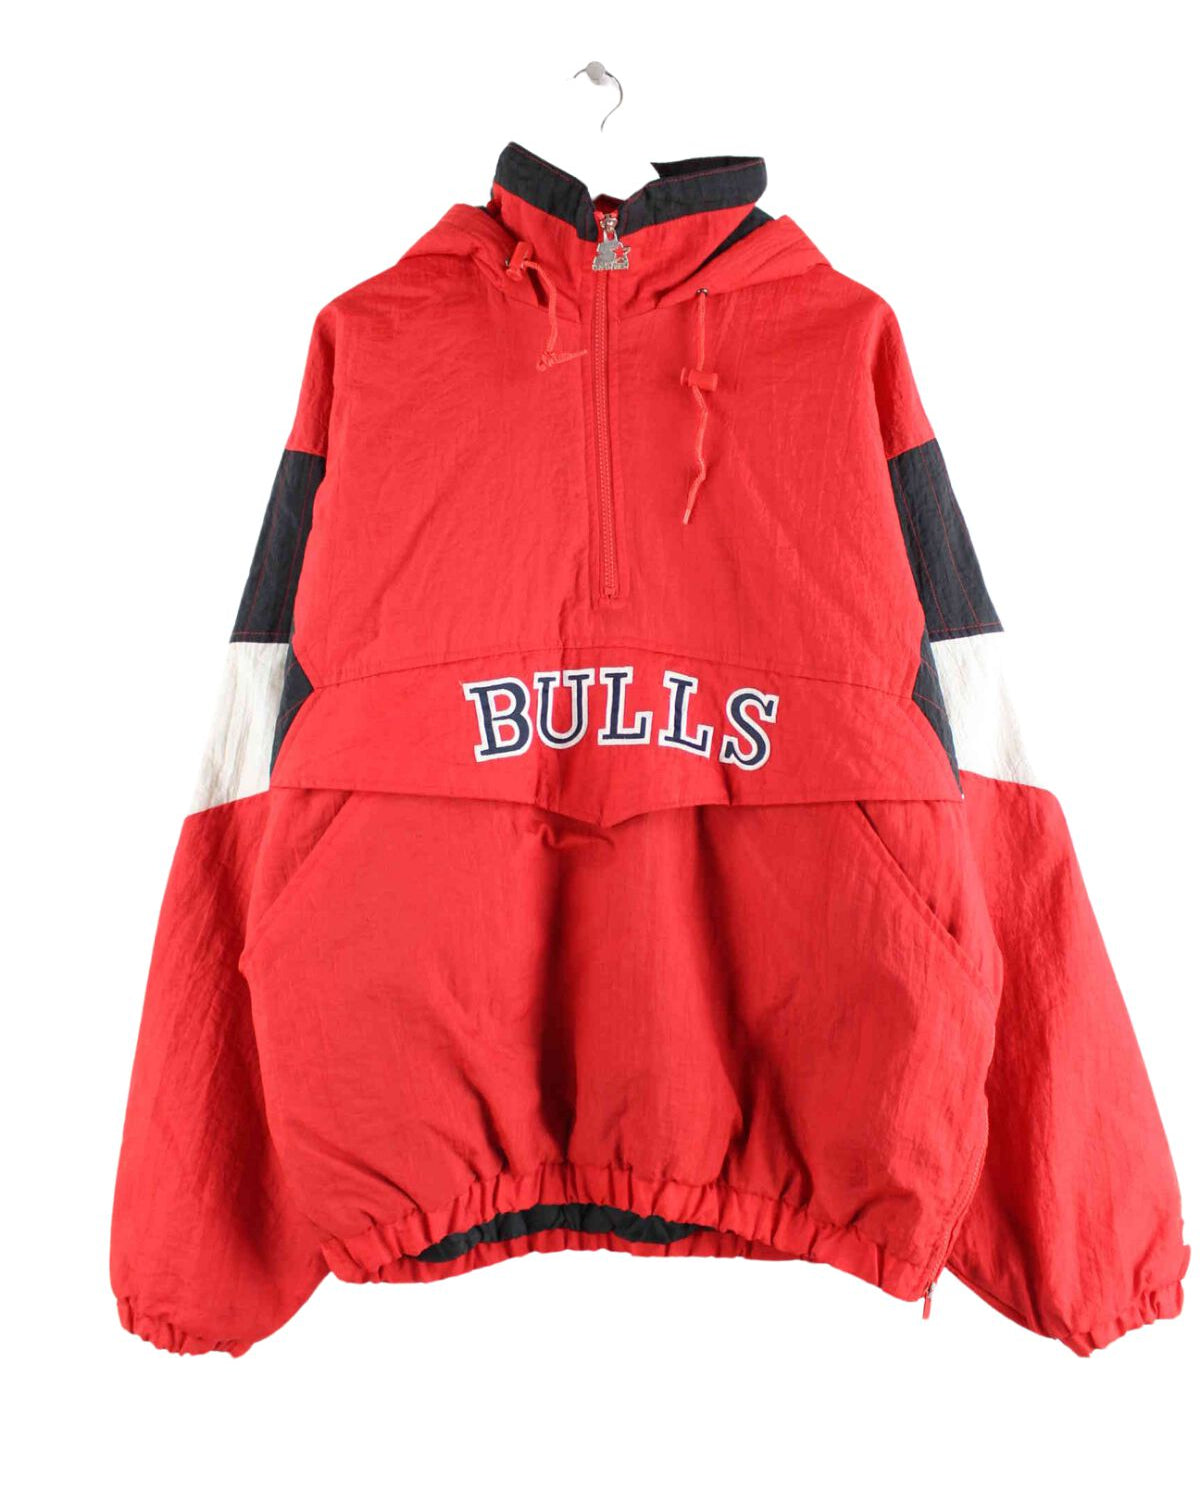 Starter 90s Vintage NBA Chicago Bulls Embroidered Jacke Rot XL (front image)